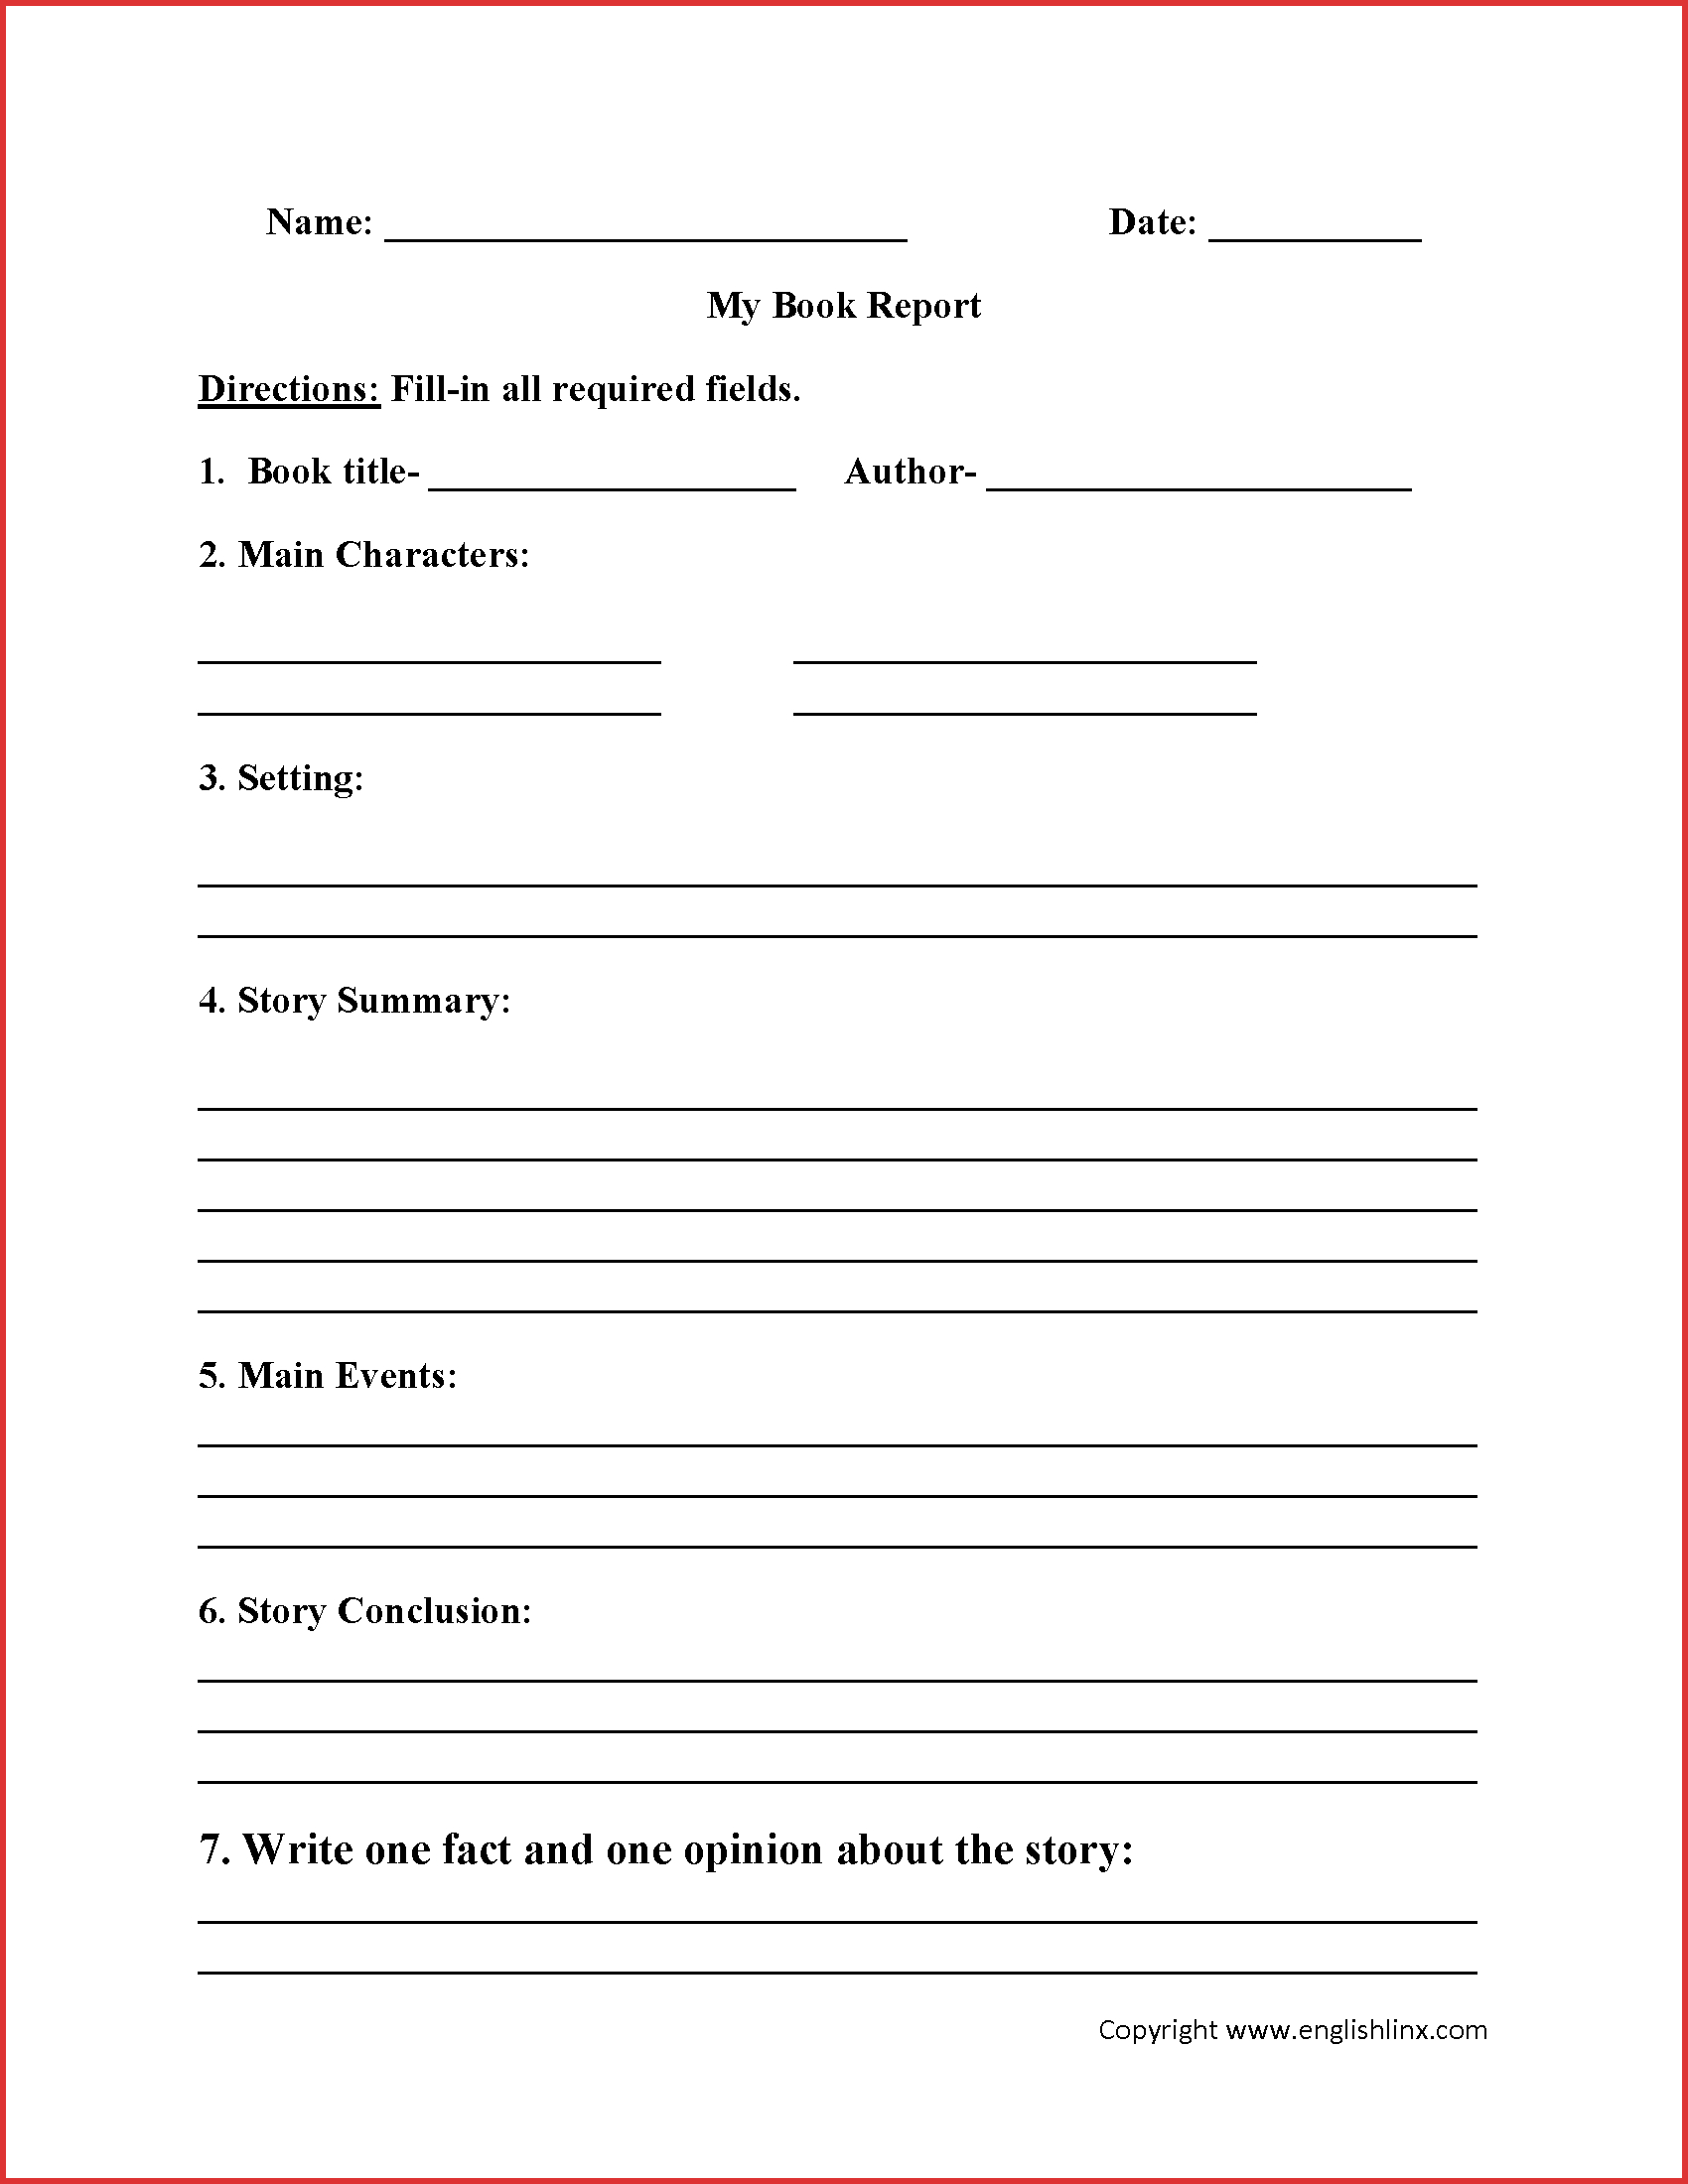 Luxury 3Rd Grade Book Report | Job Latter With Book Report Template 5Th Grade